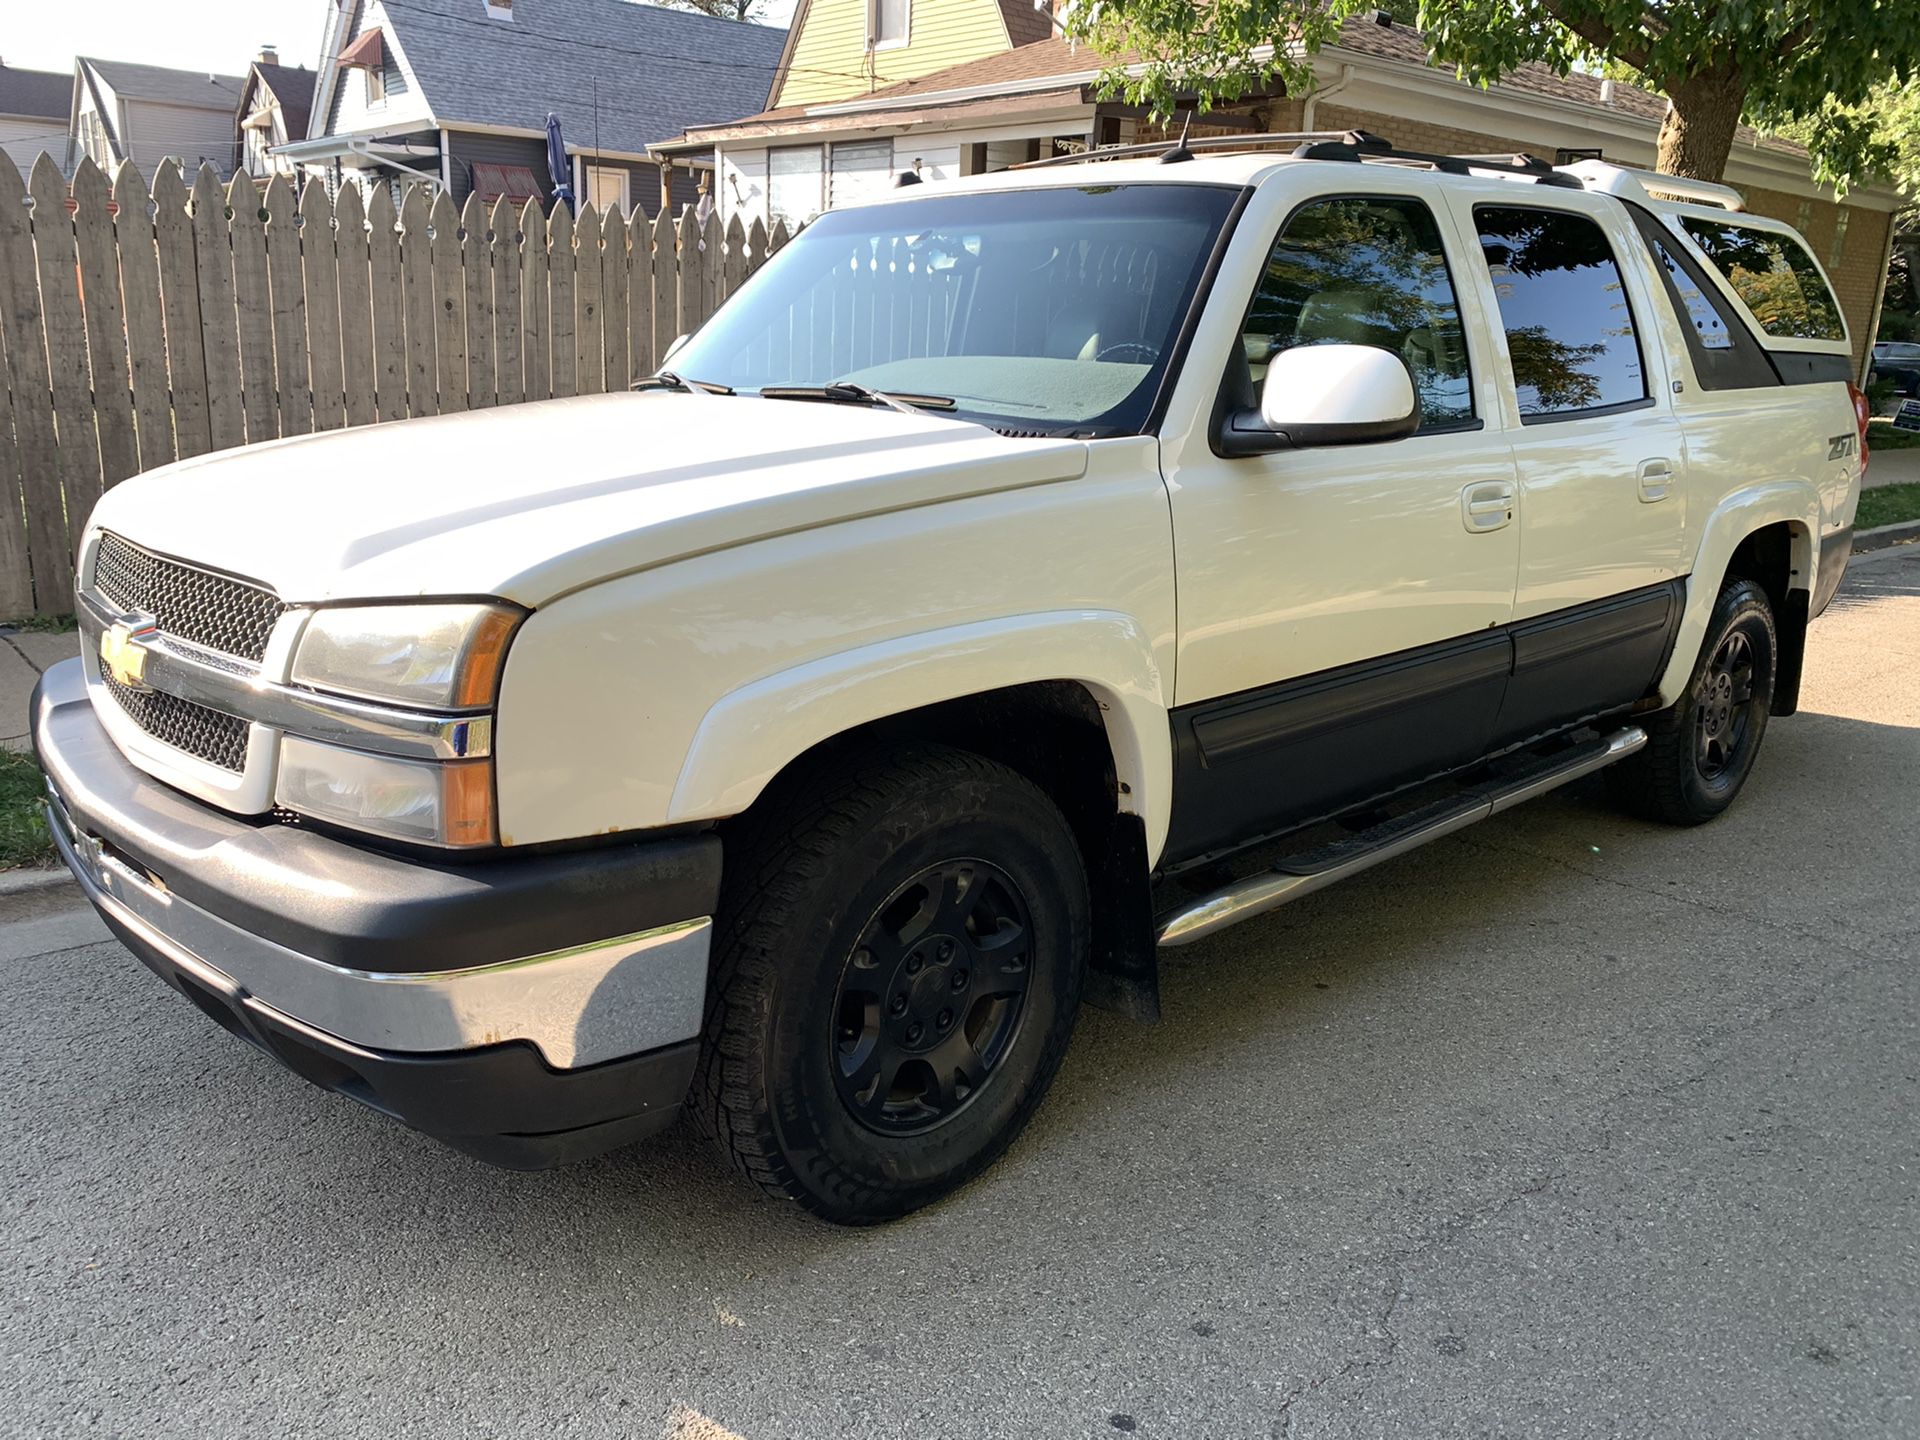 2005 Chevy Avalanche